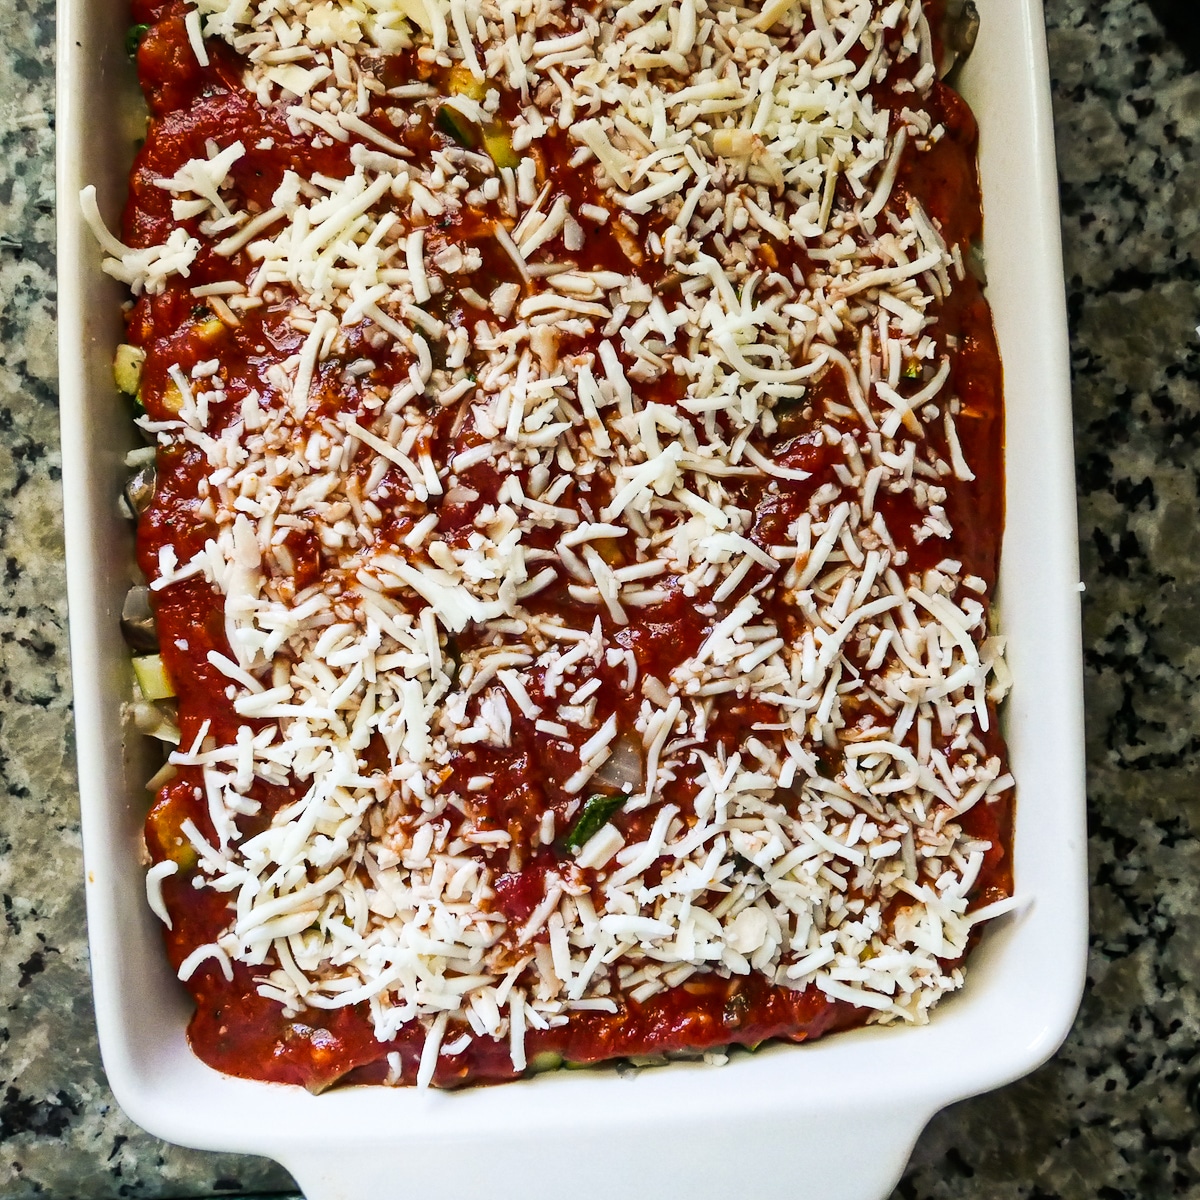 assembled lasagna in a baking dish and ready to go in the oven.